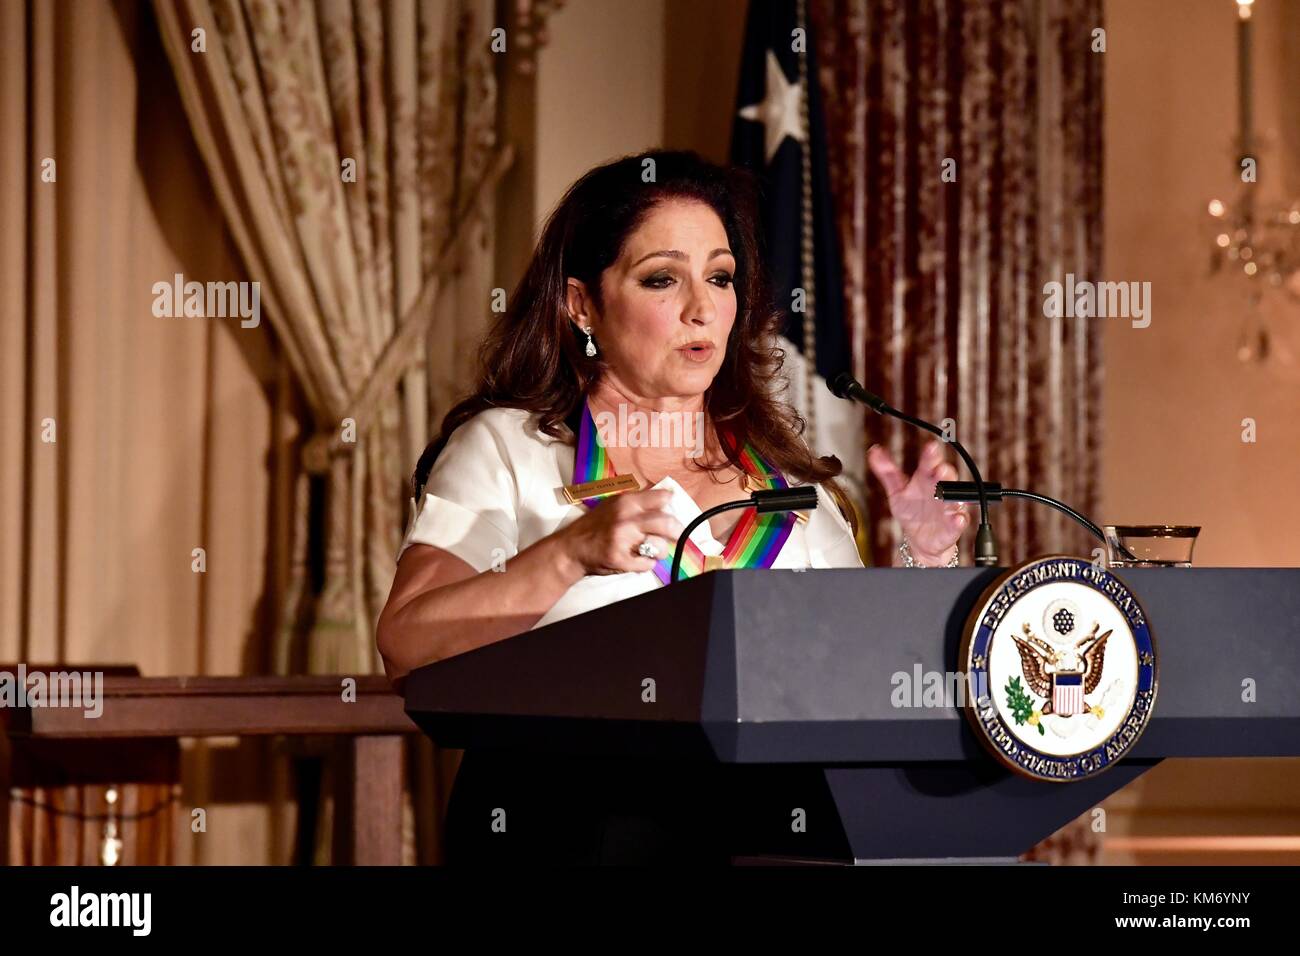 Singer Gloria Estefan, delivers remarks after receiving her Kennedy Center Honor medal during the gala dinner at the Department of State December 2, 2017 in Washington, DC. Stock Photo